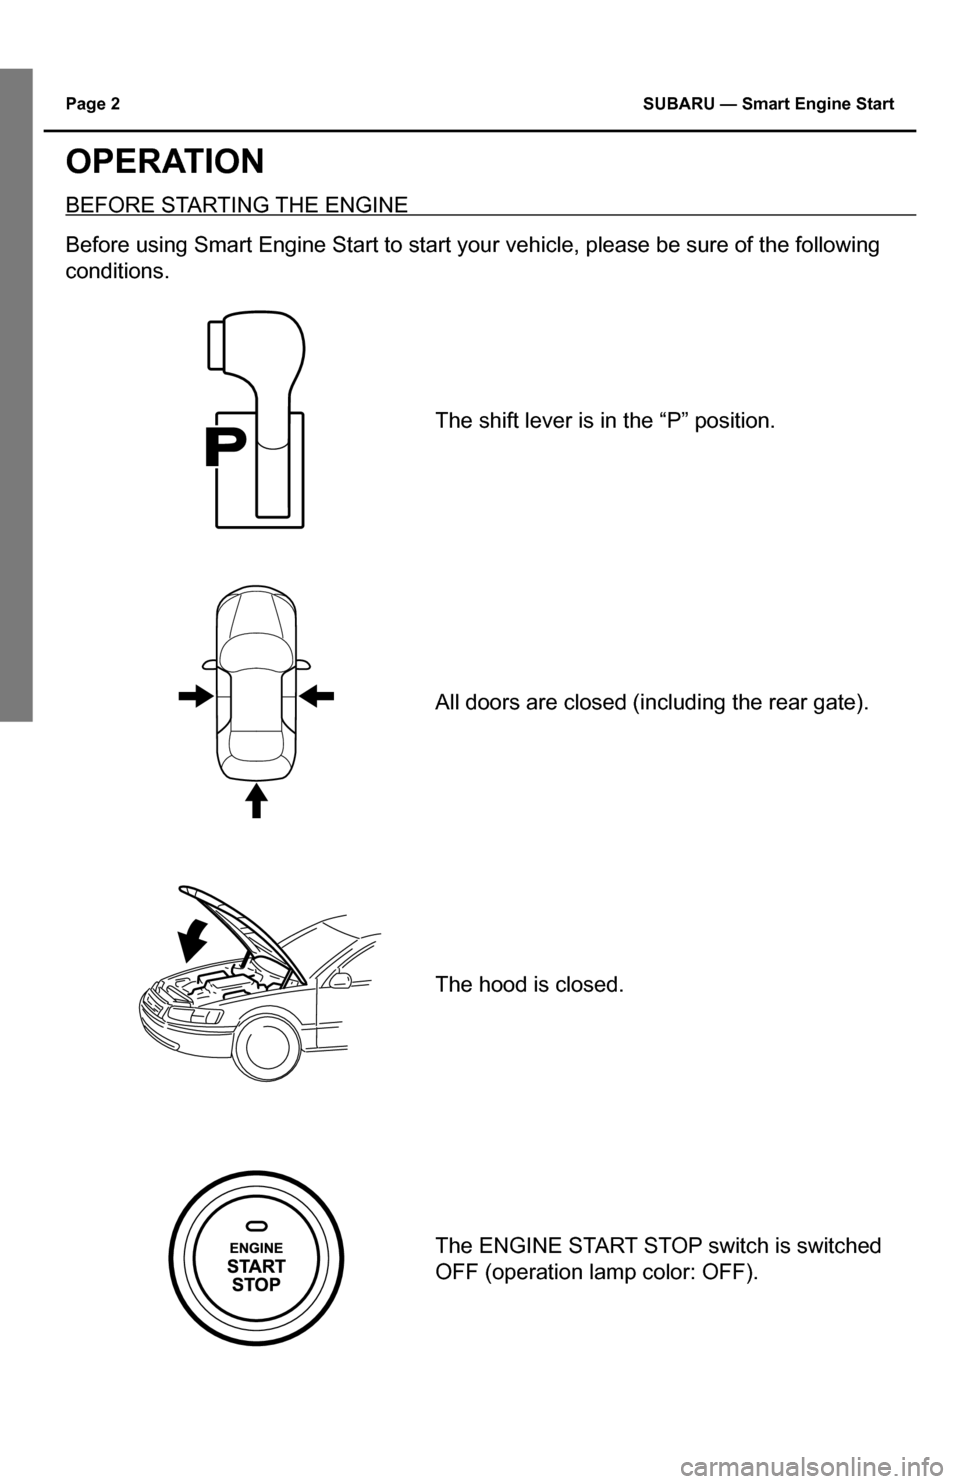 SUBARU IMPREZA 2015 4.G Smart Engine Start Guide Page 2 SUBARU — Smart Engine Start
OPERATION
BEFORE STARTING THE ENGINE 
Before using Smart Engine Start to start your vehicle, please be sure of\
 the following 
conditions.
The shift lever is in t